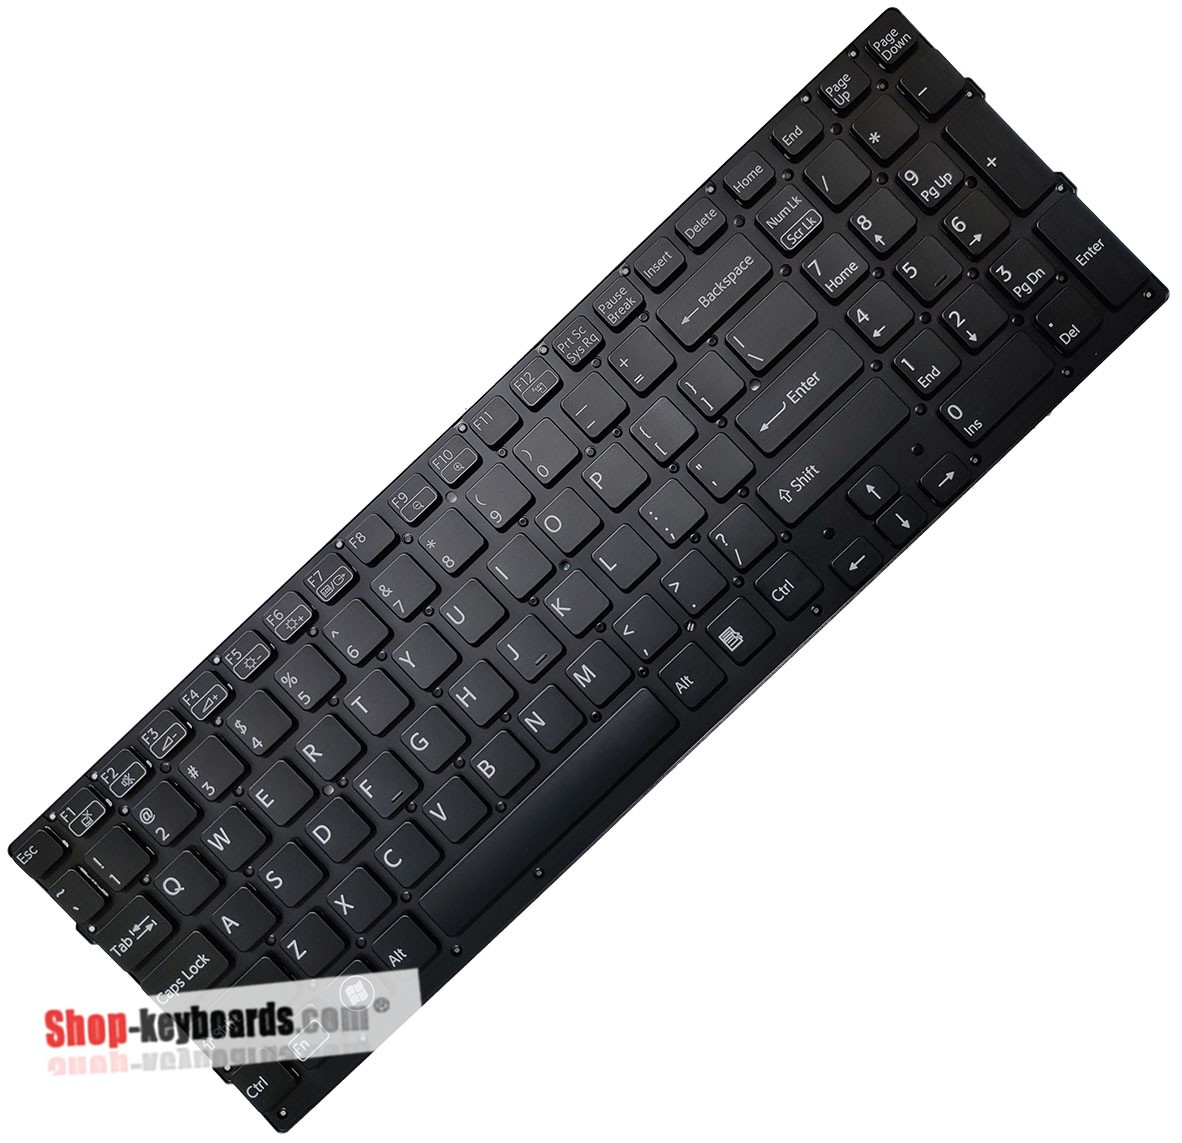 Sony VAIO VPC-F22L1E Keyboard replacement